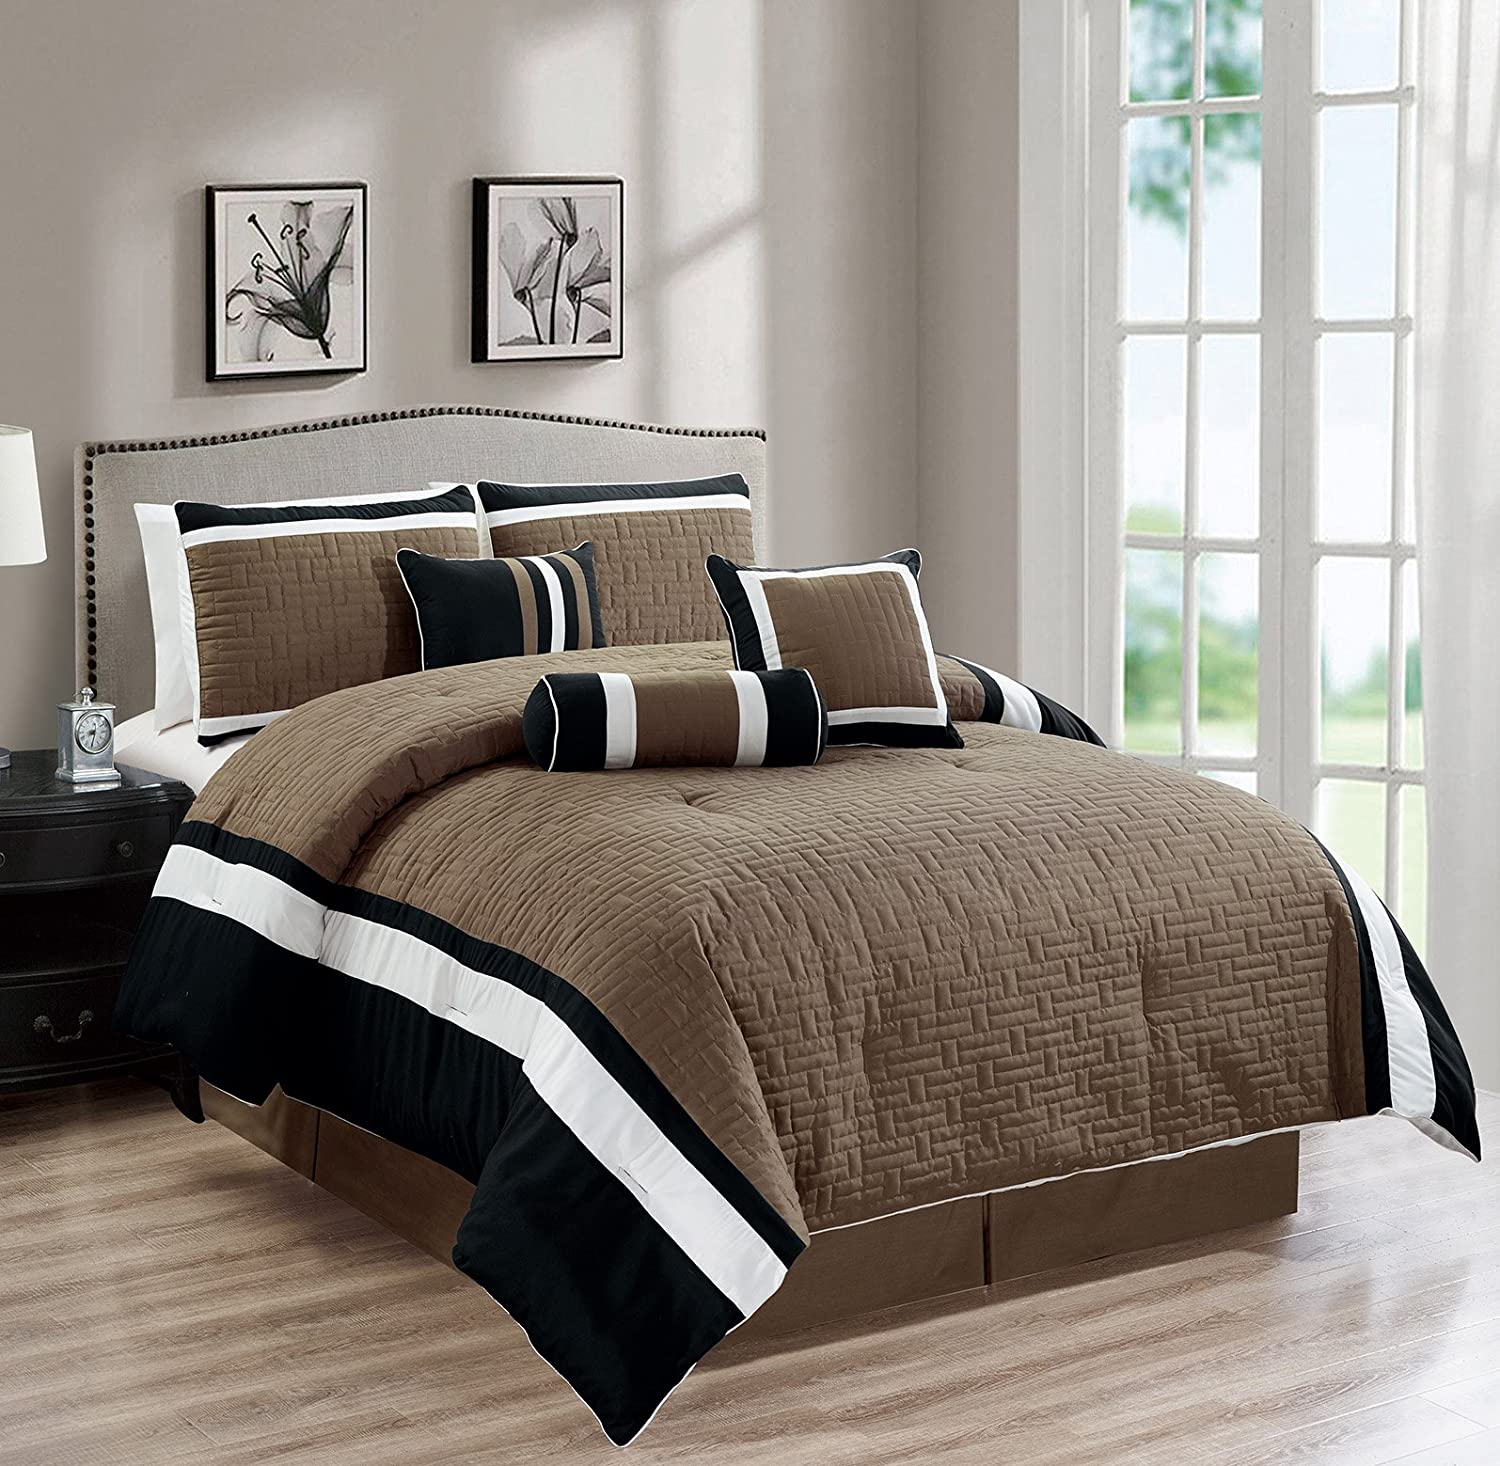 Queen, Details about   All American Collection New 7 Piece Embroidered Over-Sized Comforter Set 